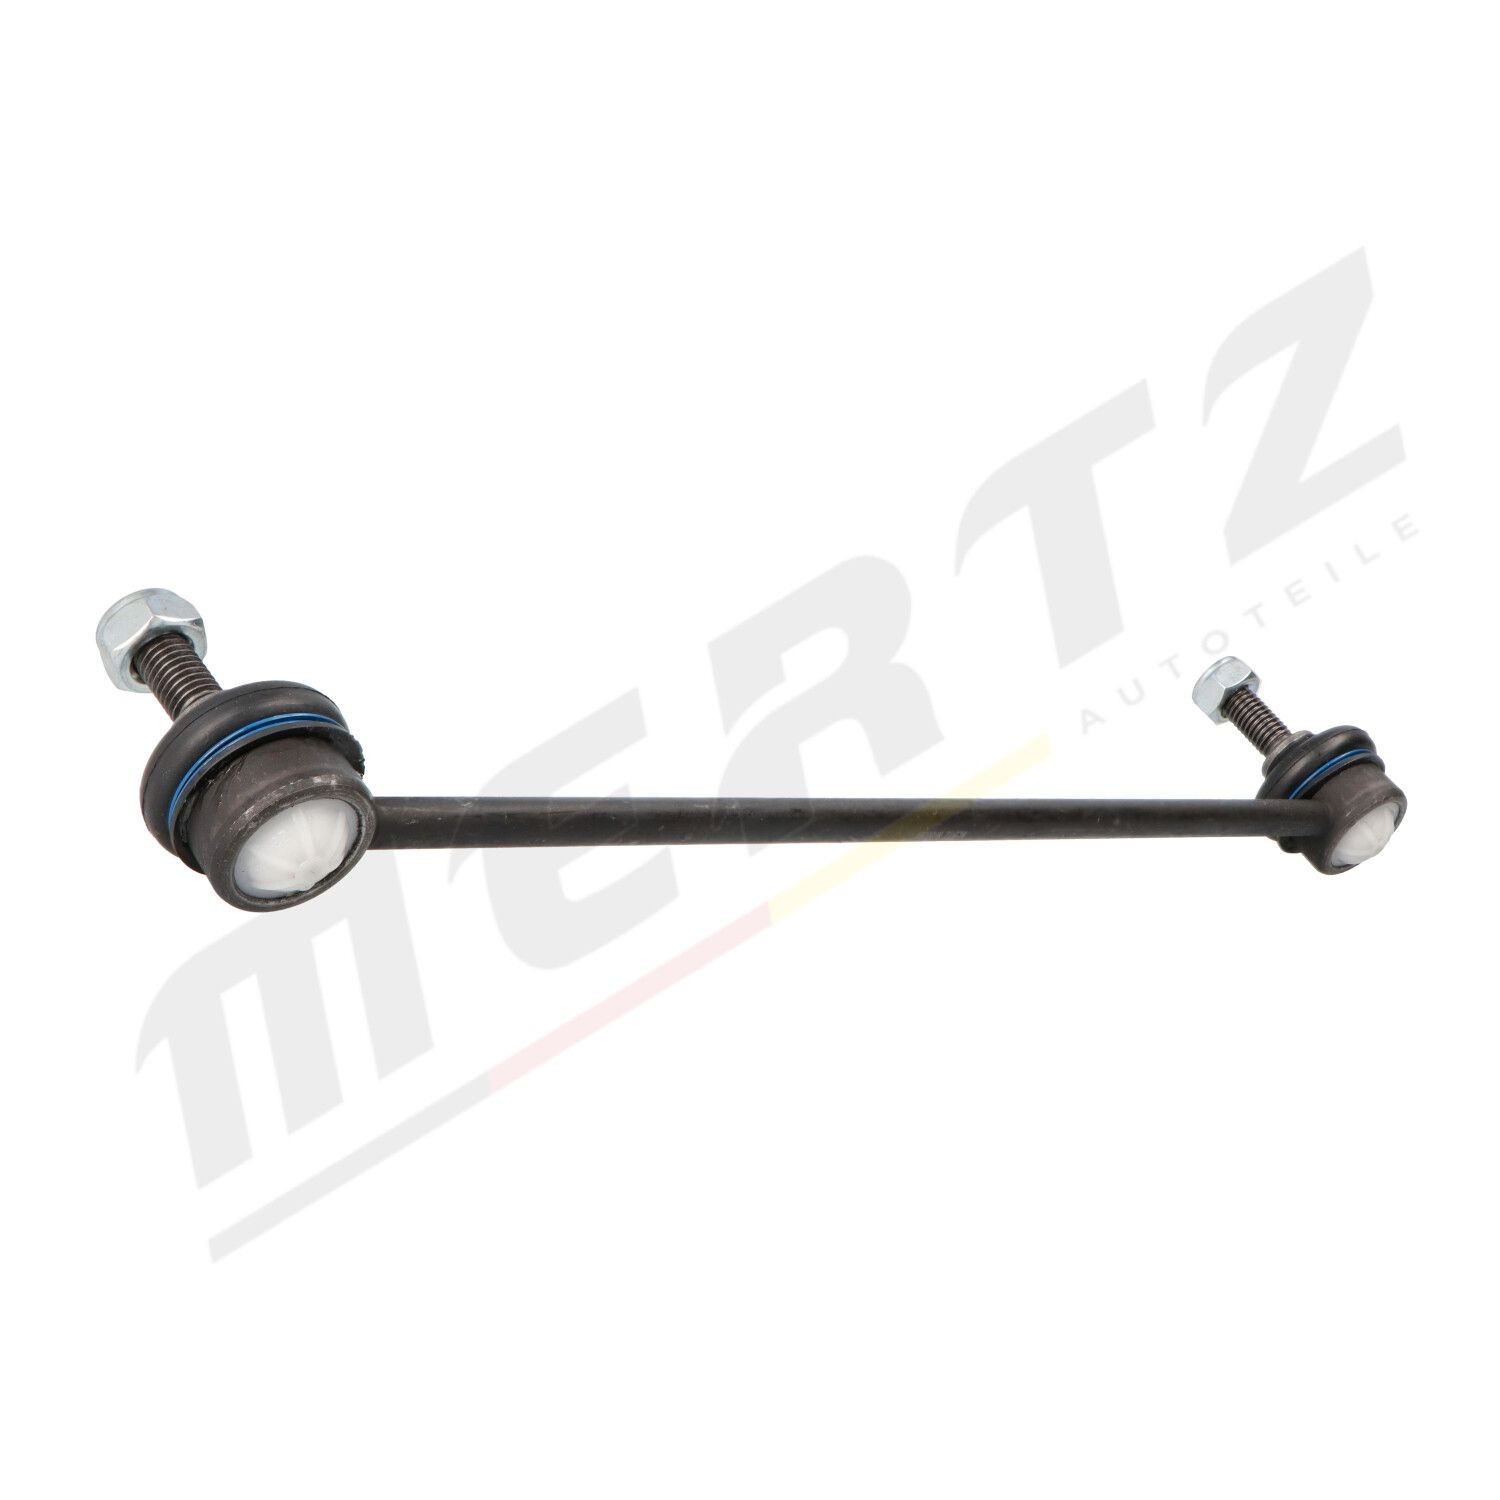 MS0391 Anti-roll bar links MERTZ M-S0391 review and test